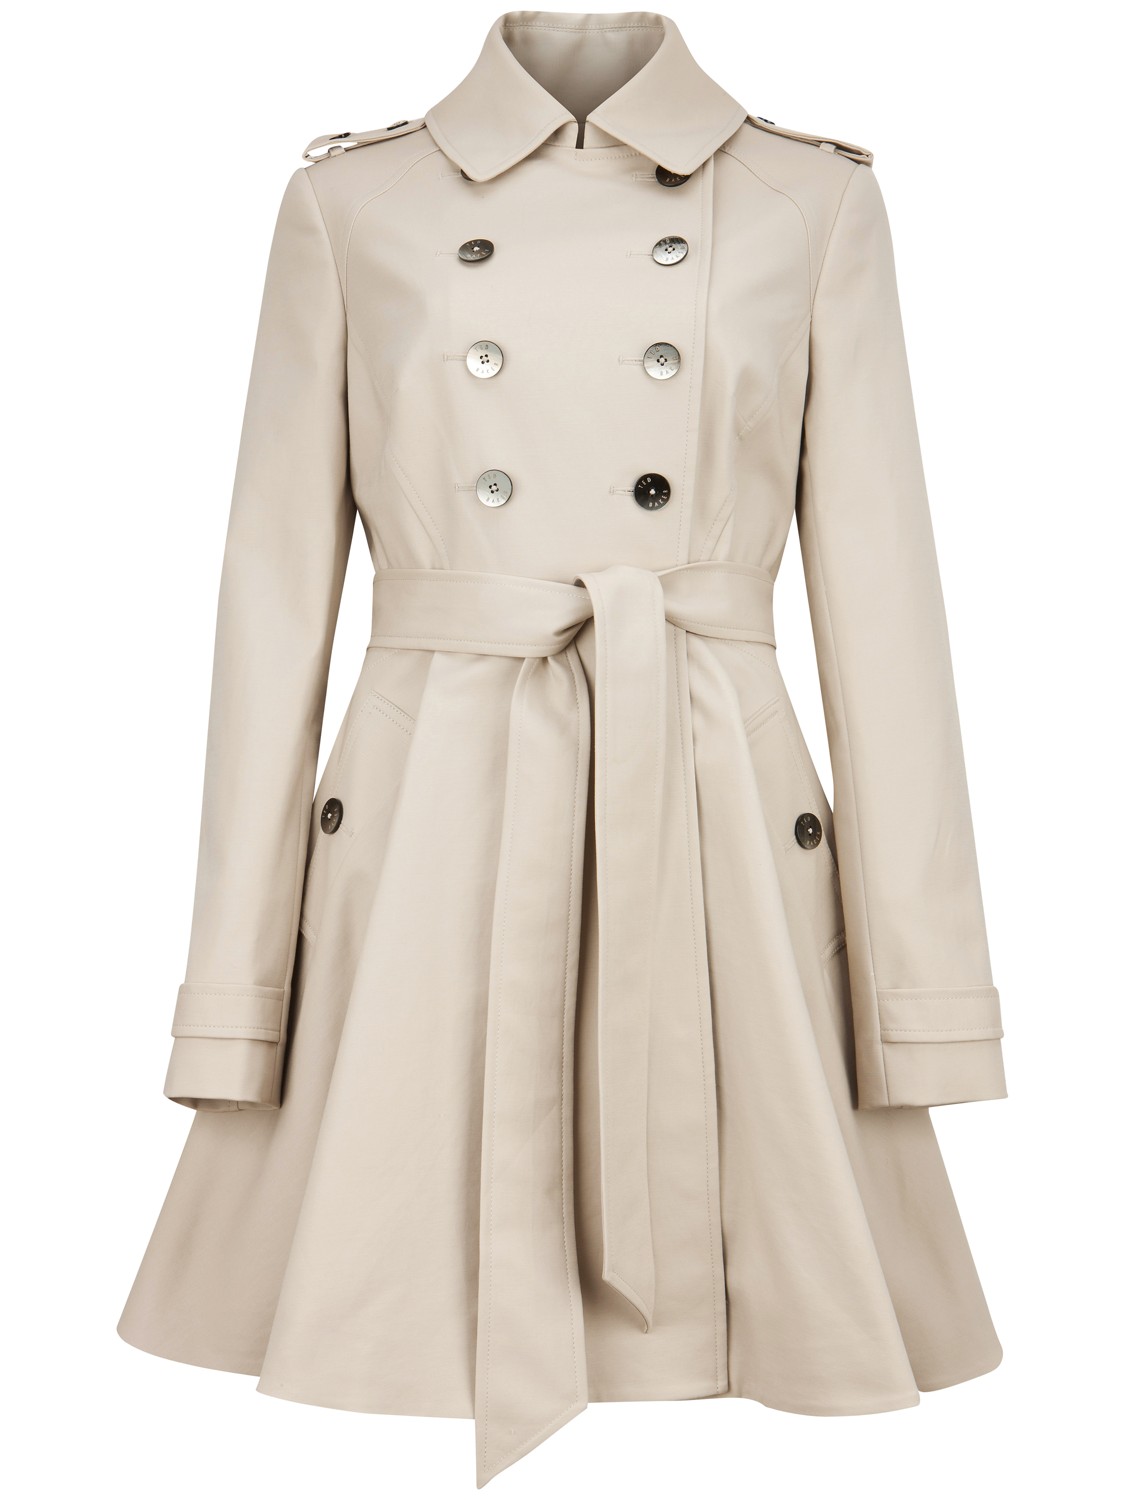 Ted Baker Moriah Double Breasted Coat in Beige (Natural) - Lyst